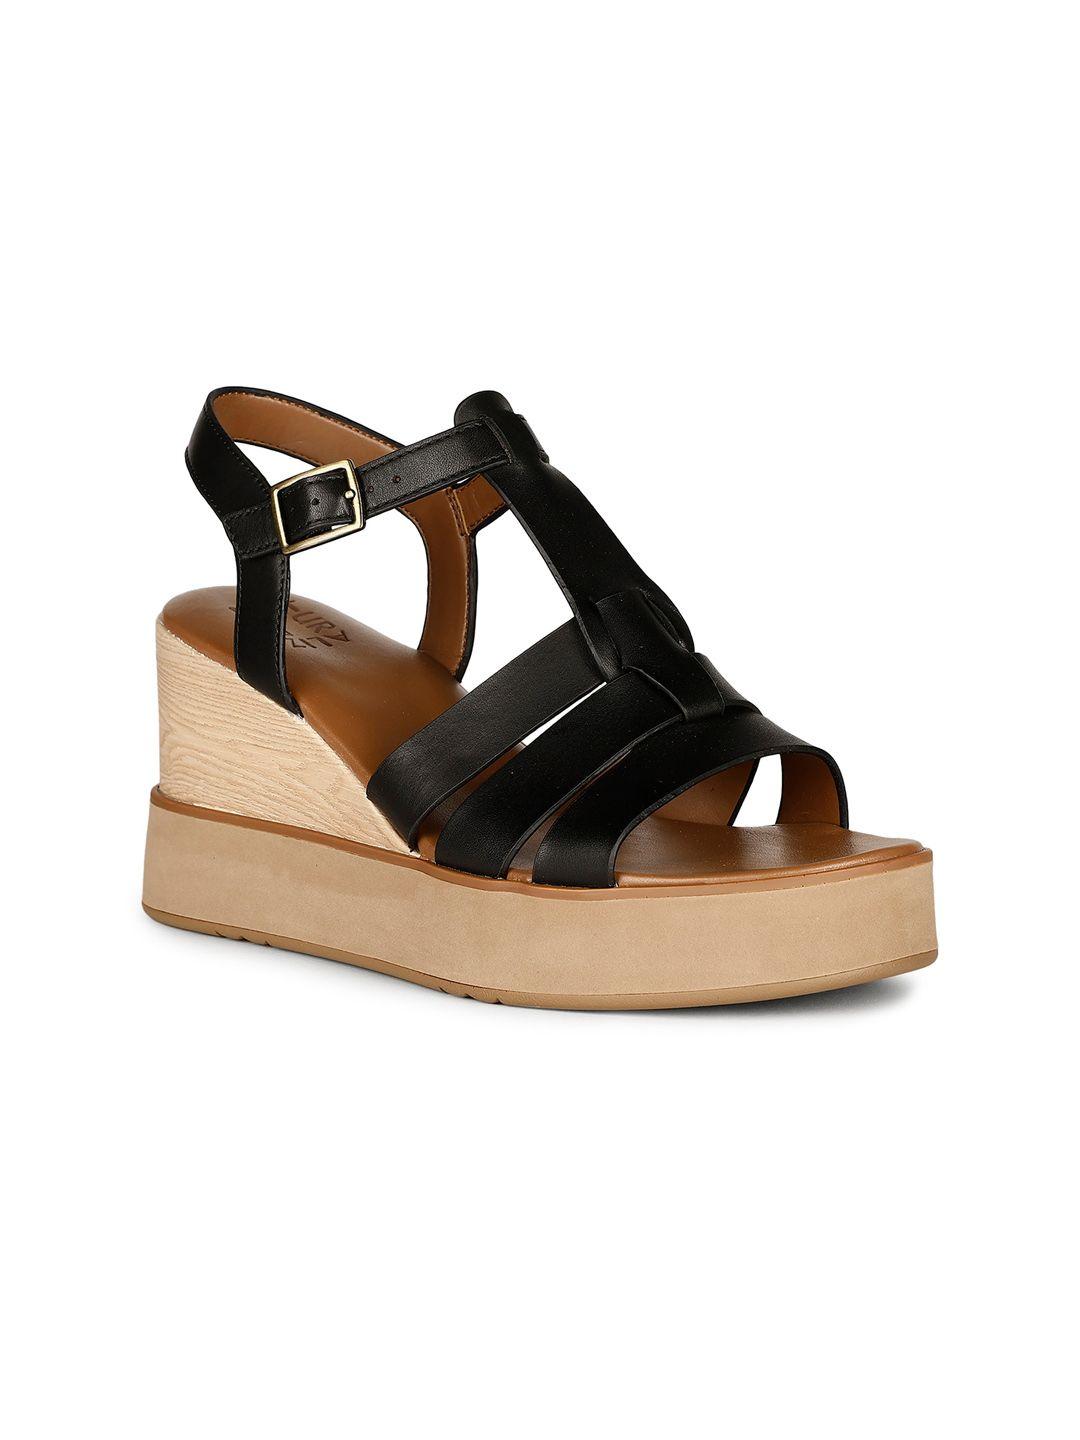 naturalizer-barrett-open-toe-leather-wedges-with-backstrap